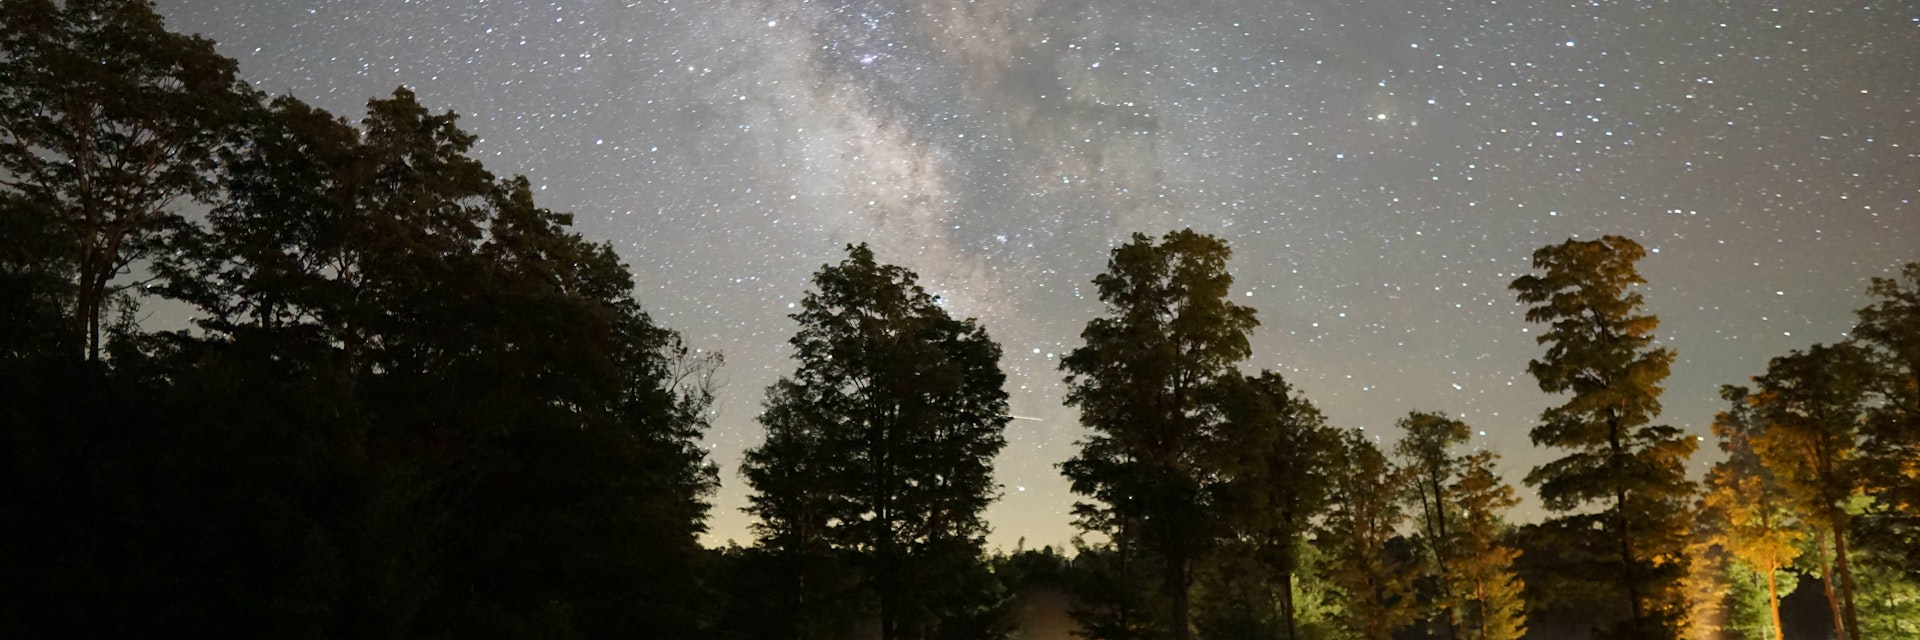 Night sky with the Milky Way above Cherry Springs State Park.